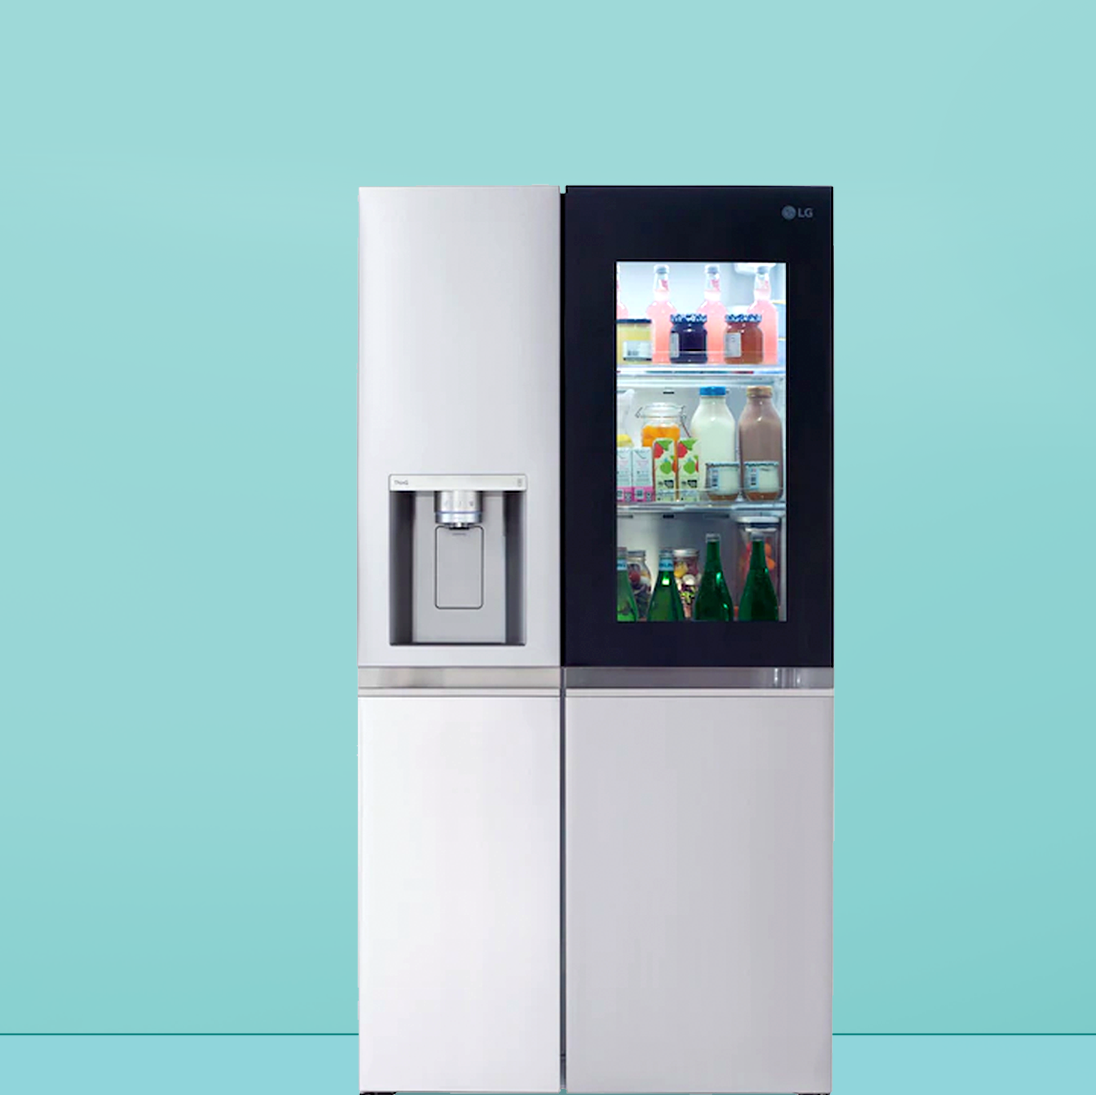 https://hips.hearstapps.com/hmg-prod/images/gh-050122-best-smart-refrigerators-1651503837.png?crop=0.548xw:0.842xh;0.250xw,0.0468xh&resize=1200:*